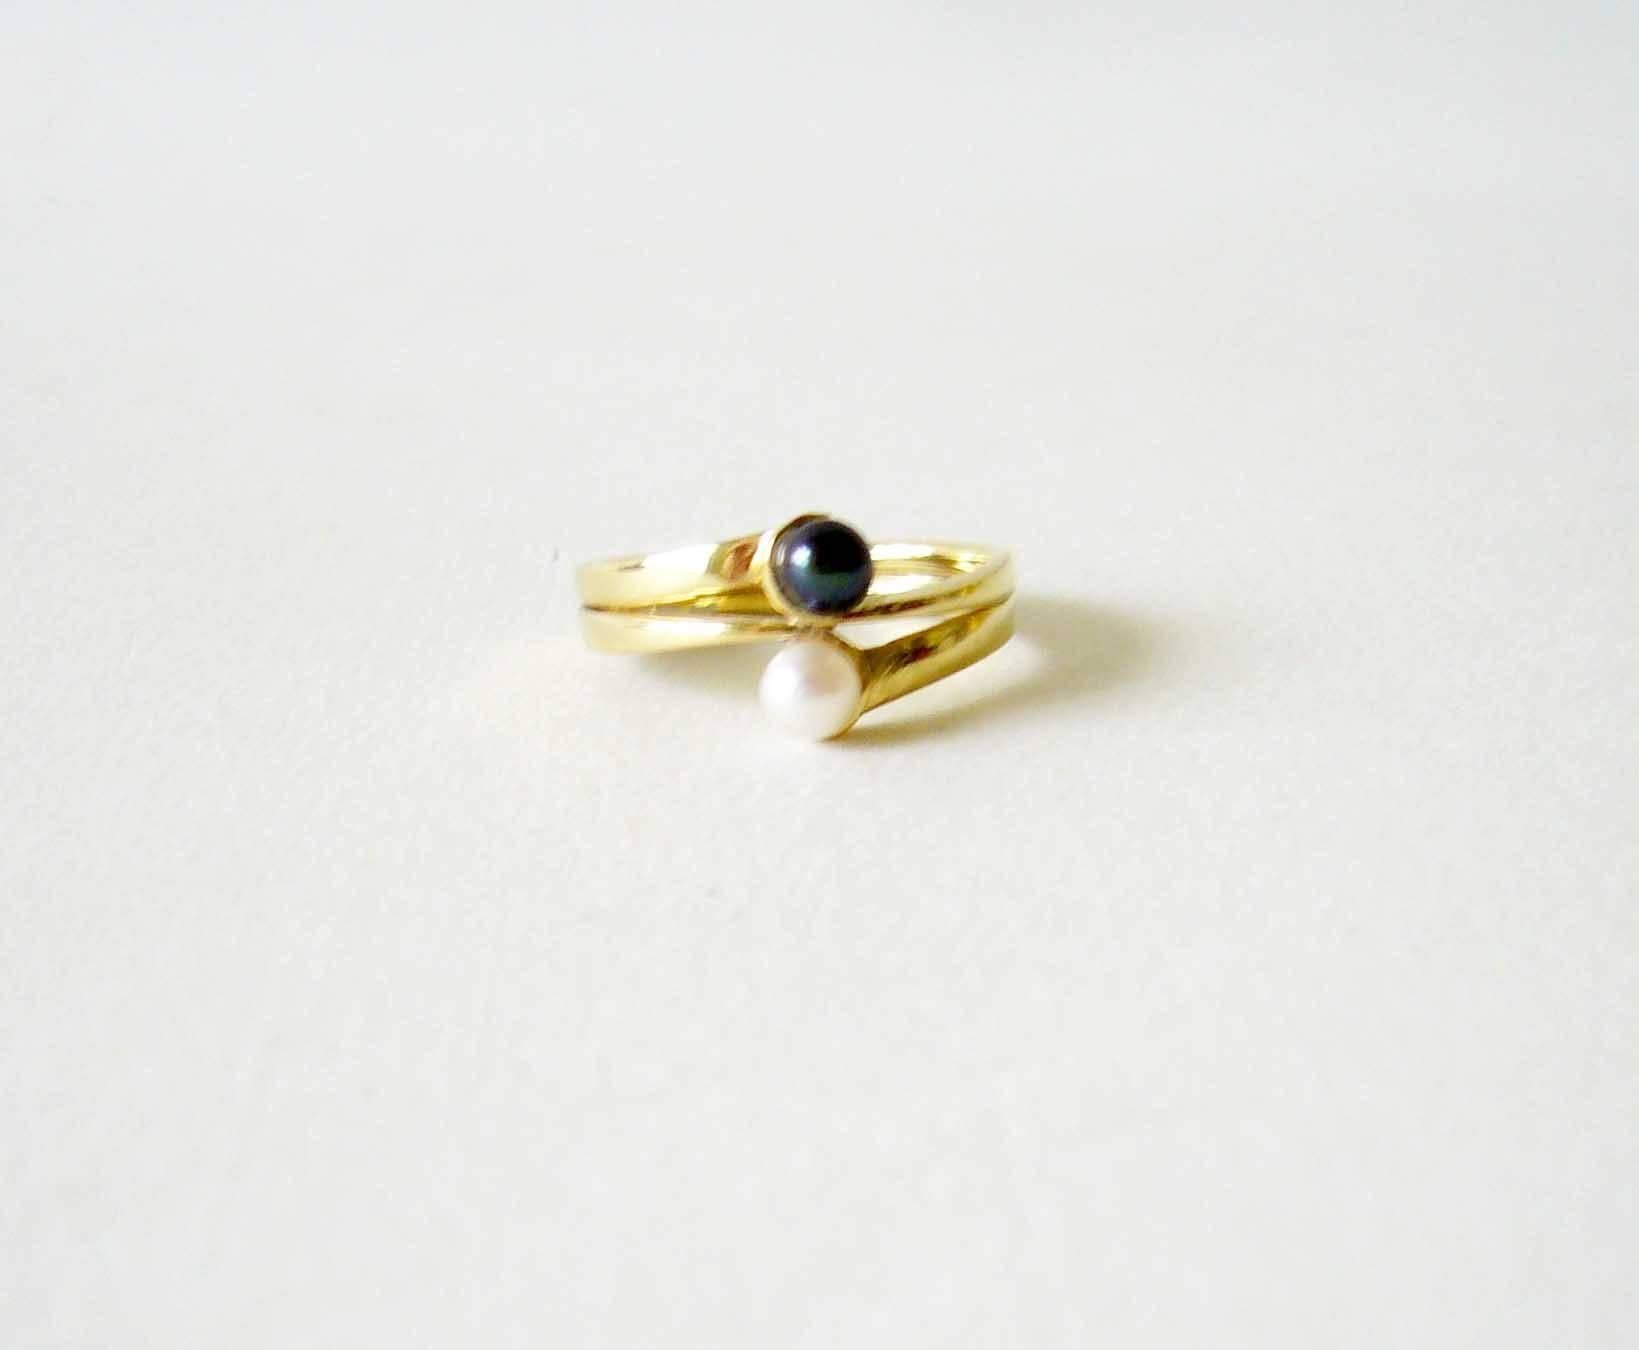 Dainty 14k gold ring featuring one white and one black pearl at center, created by Jack Nutting of San Francisco, California circa 1970's.  Ring is a finger size 5.5 to 5.75 and is unsigned.  From the estate of the artist, Jack Nutting.  In very